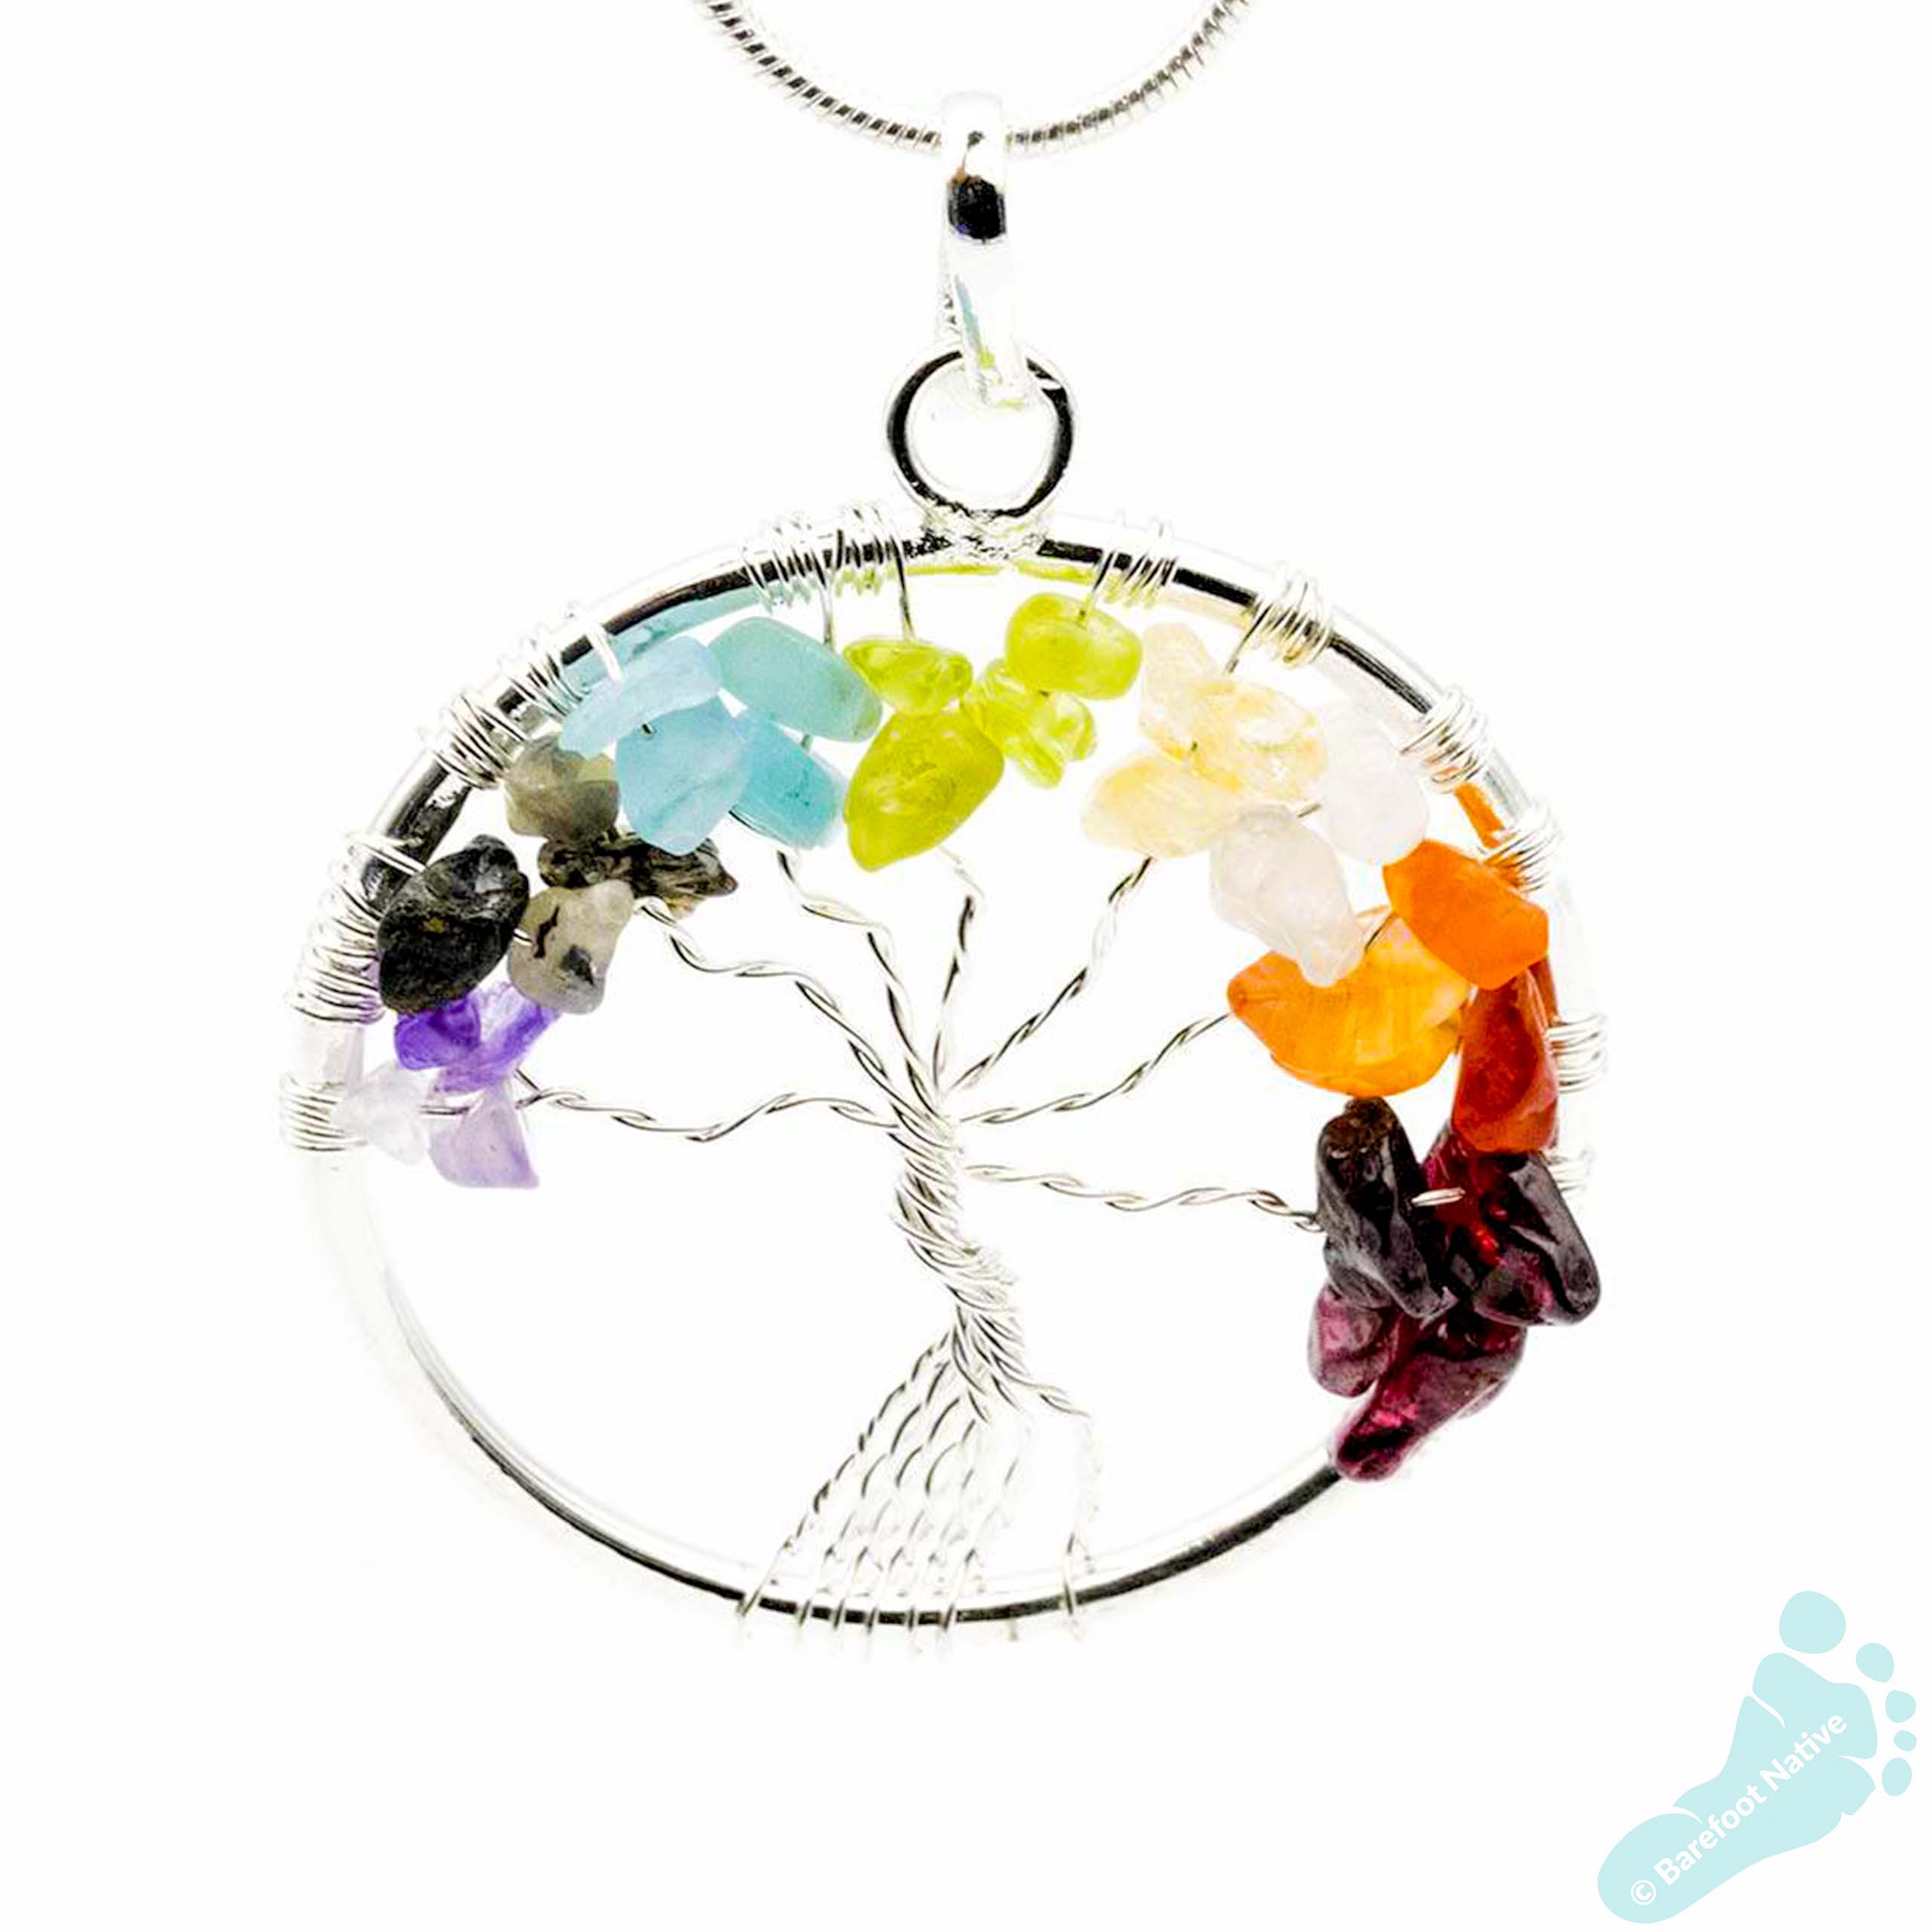 Chakra Tree Of Life Pendant Necklace With Owl Lucky Charm - Zencrafthouse